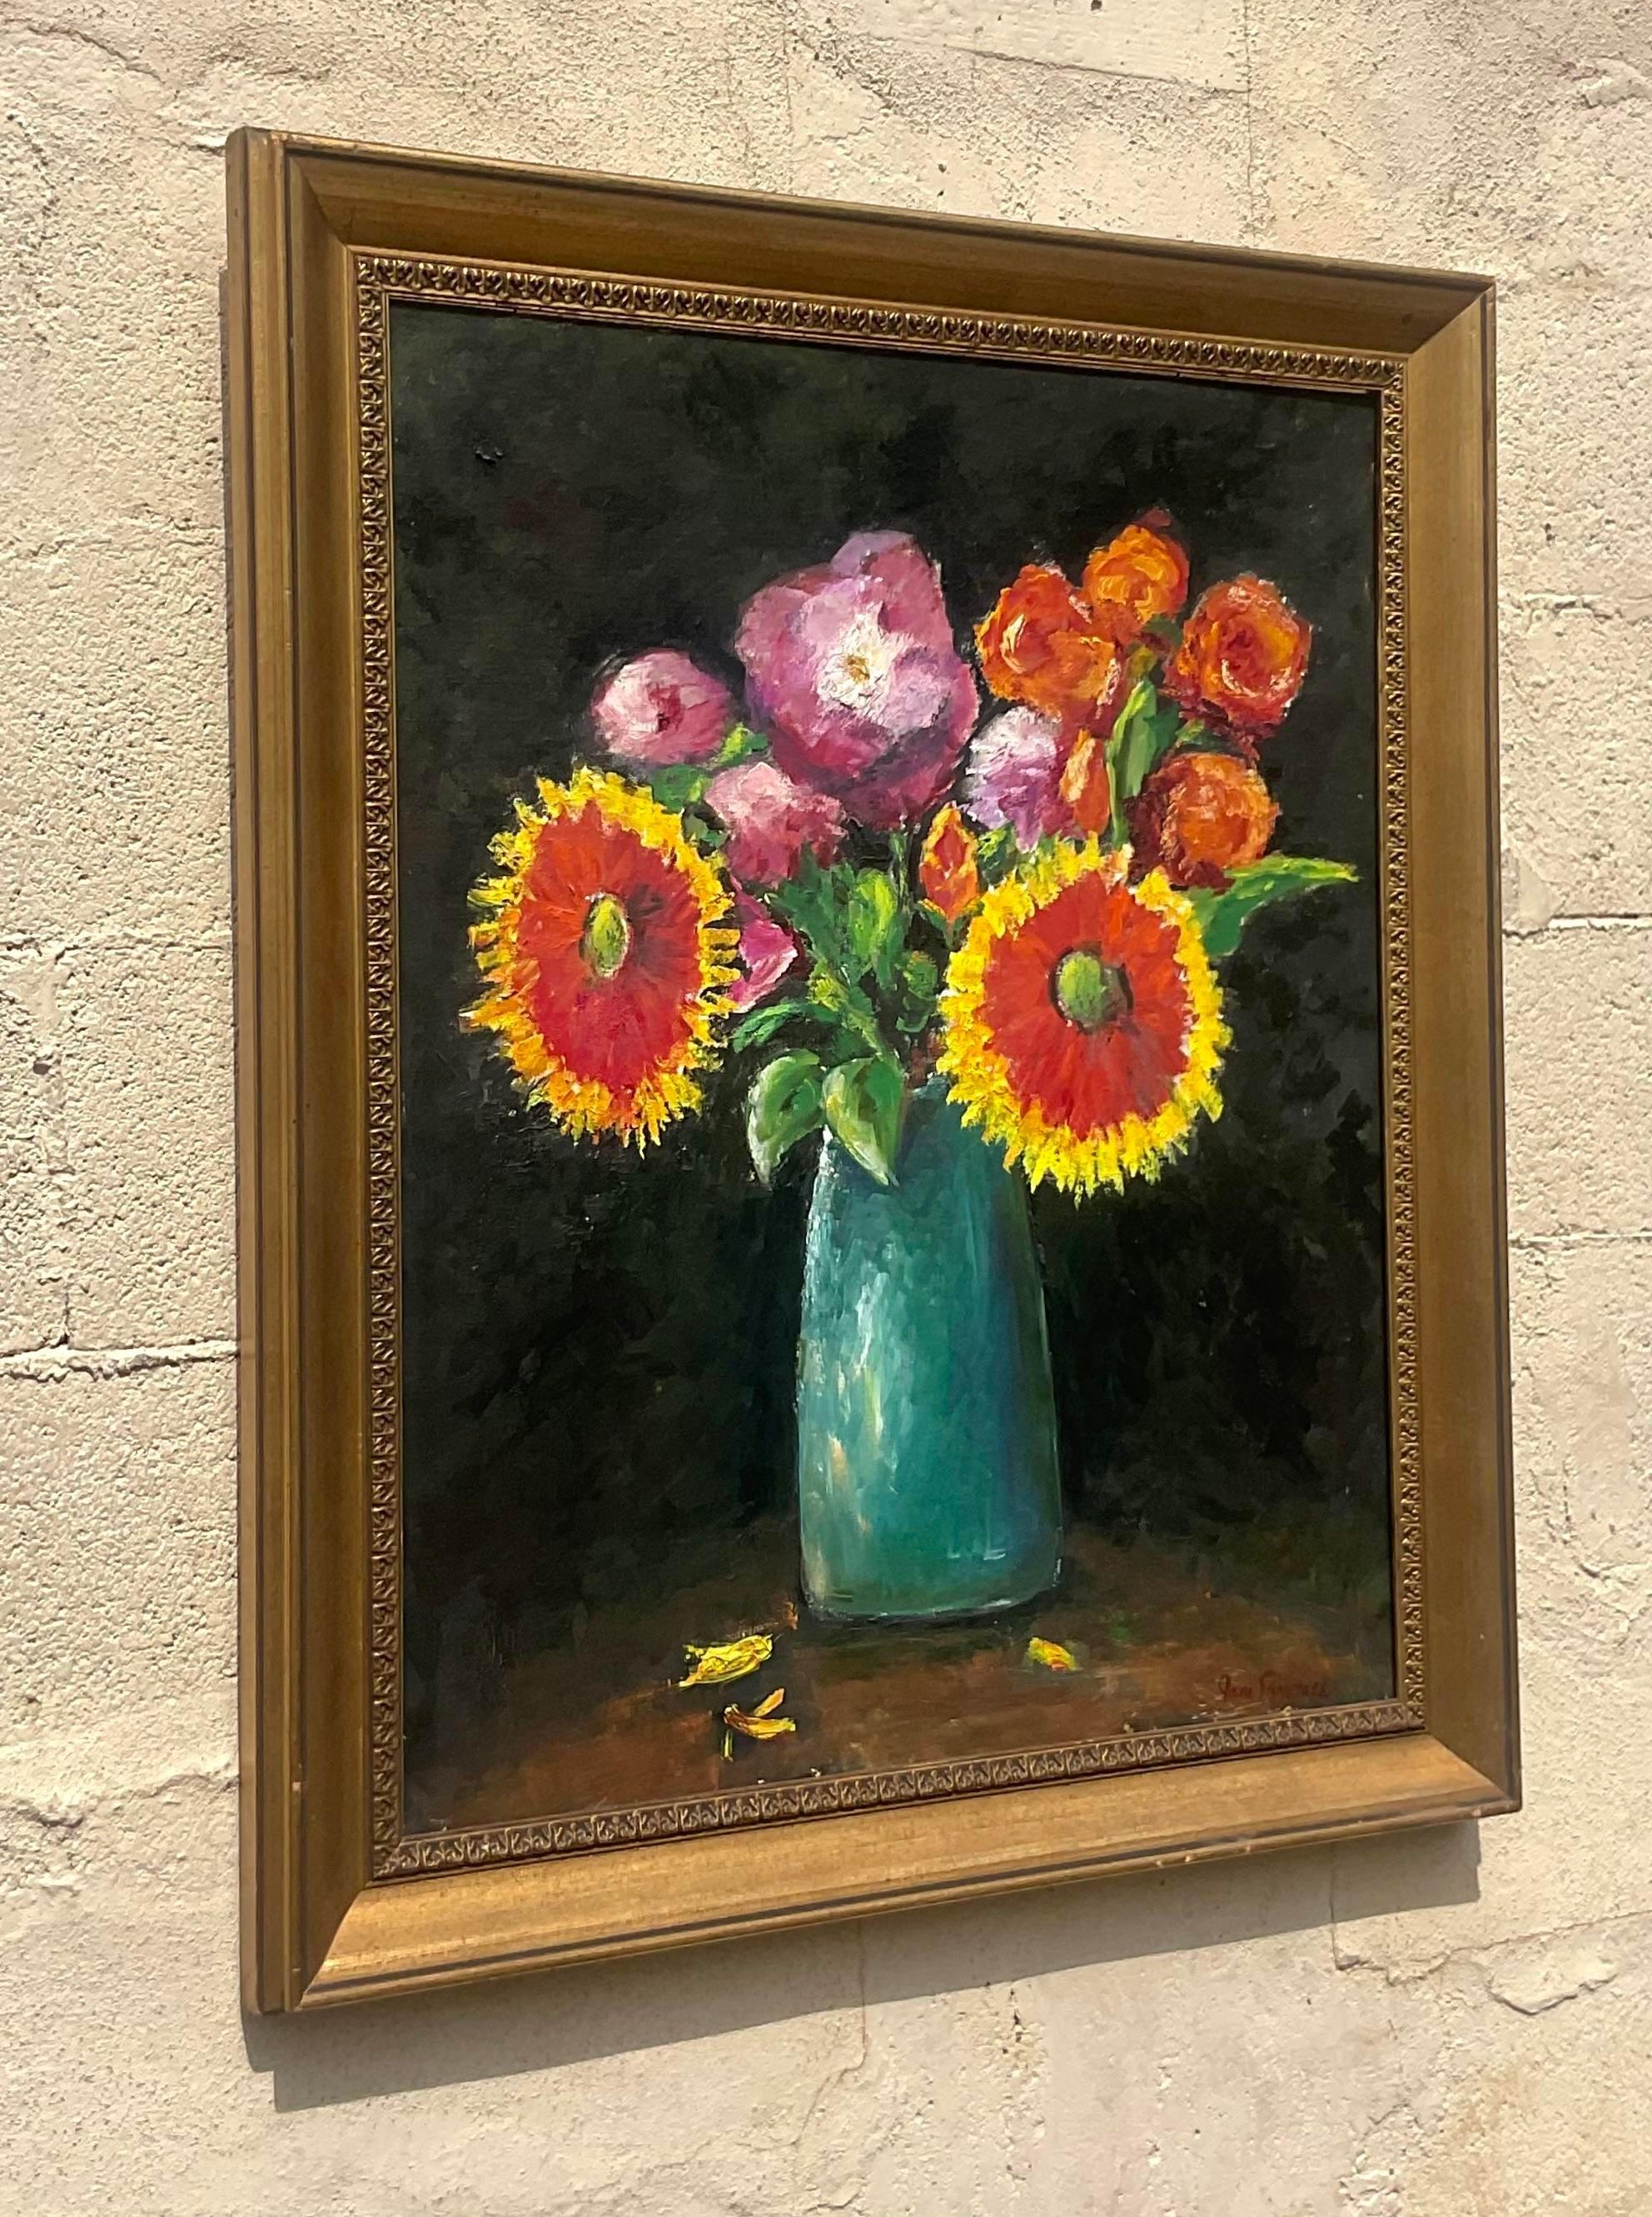 A fantastic vintage Boho original oil painting on canvas. A chic floral composition with bright clear colors. Signed by the artist. Acquired from a Palm Beach estate. 